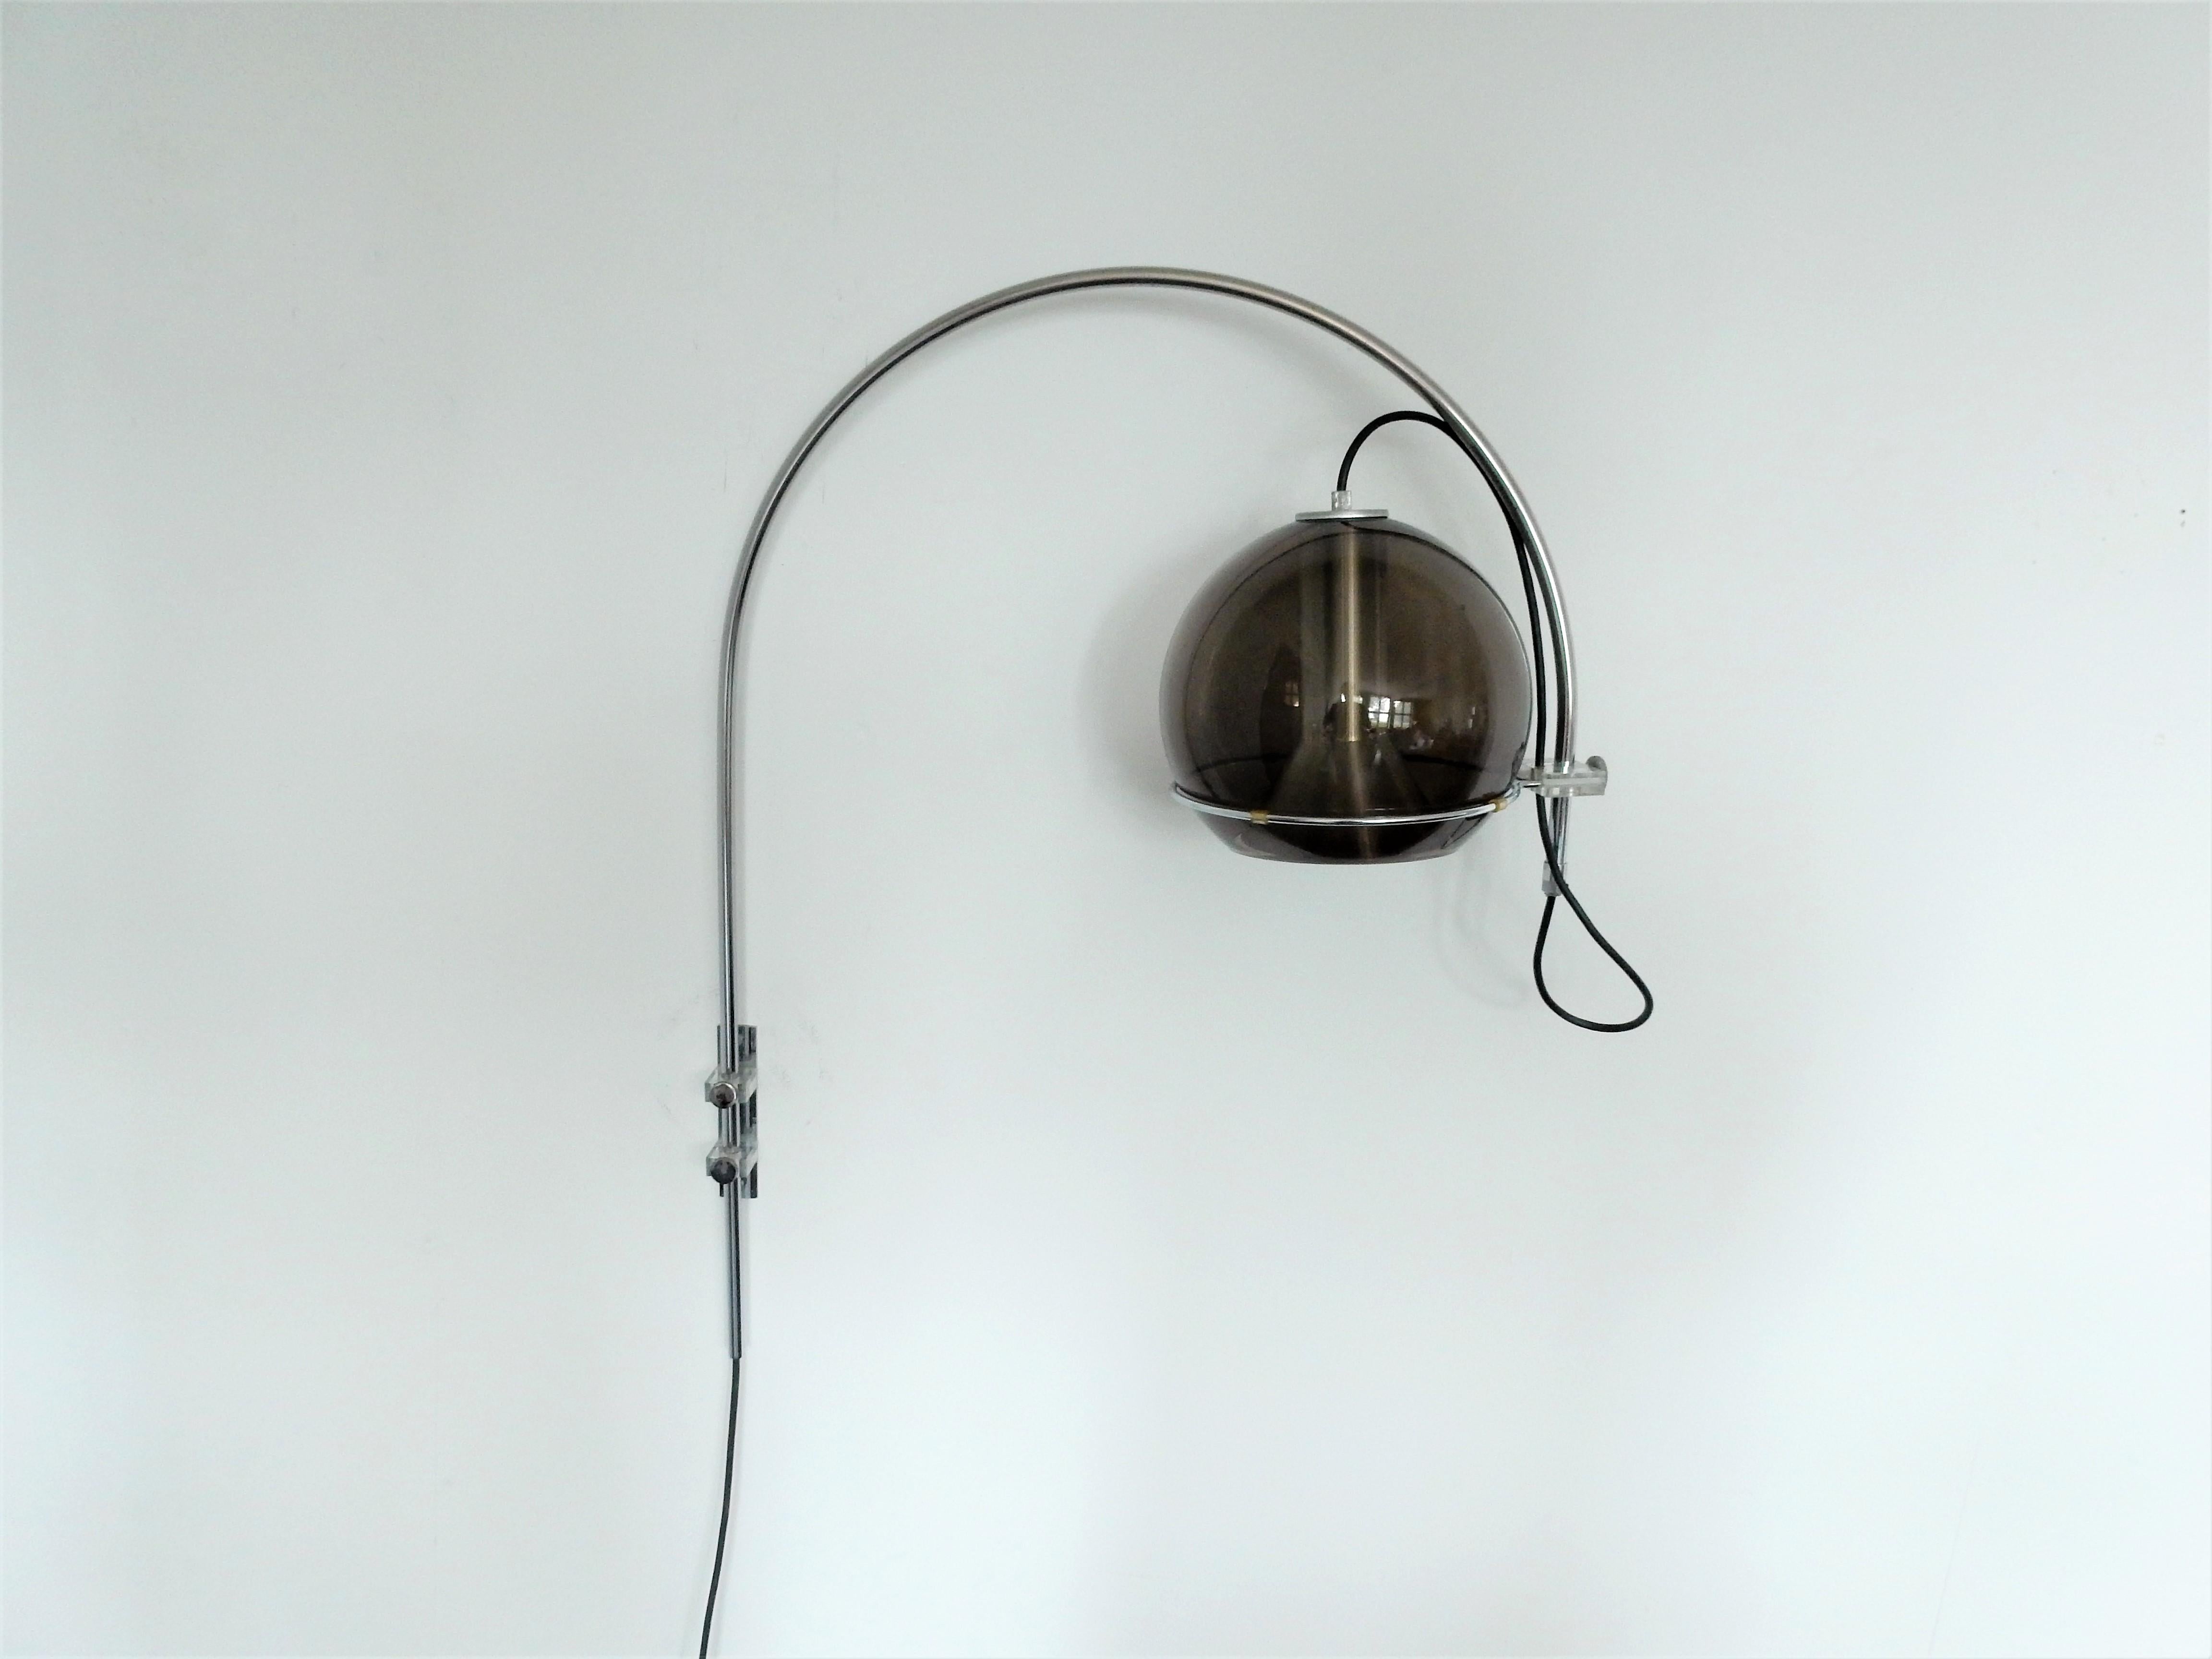 This elegant globe wall lamp, model Sagittarius' was designed by Frank Ligtelijn for Raak Amsterdam. A chrome-plated arch that is swivable sideways and adjustable in height. Mounted to the wall, with the classical smoked glass globe and aluminum